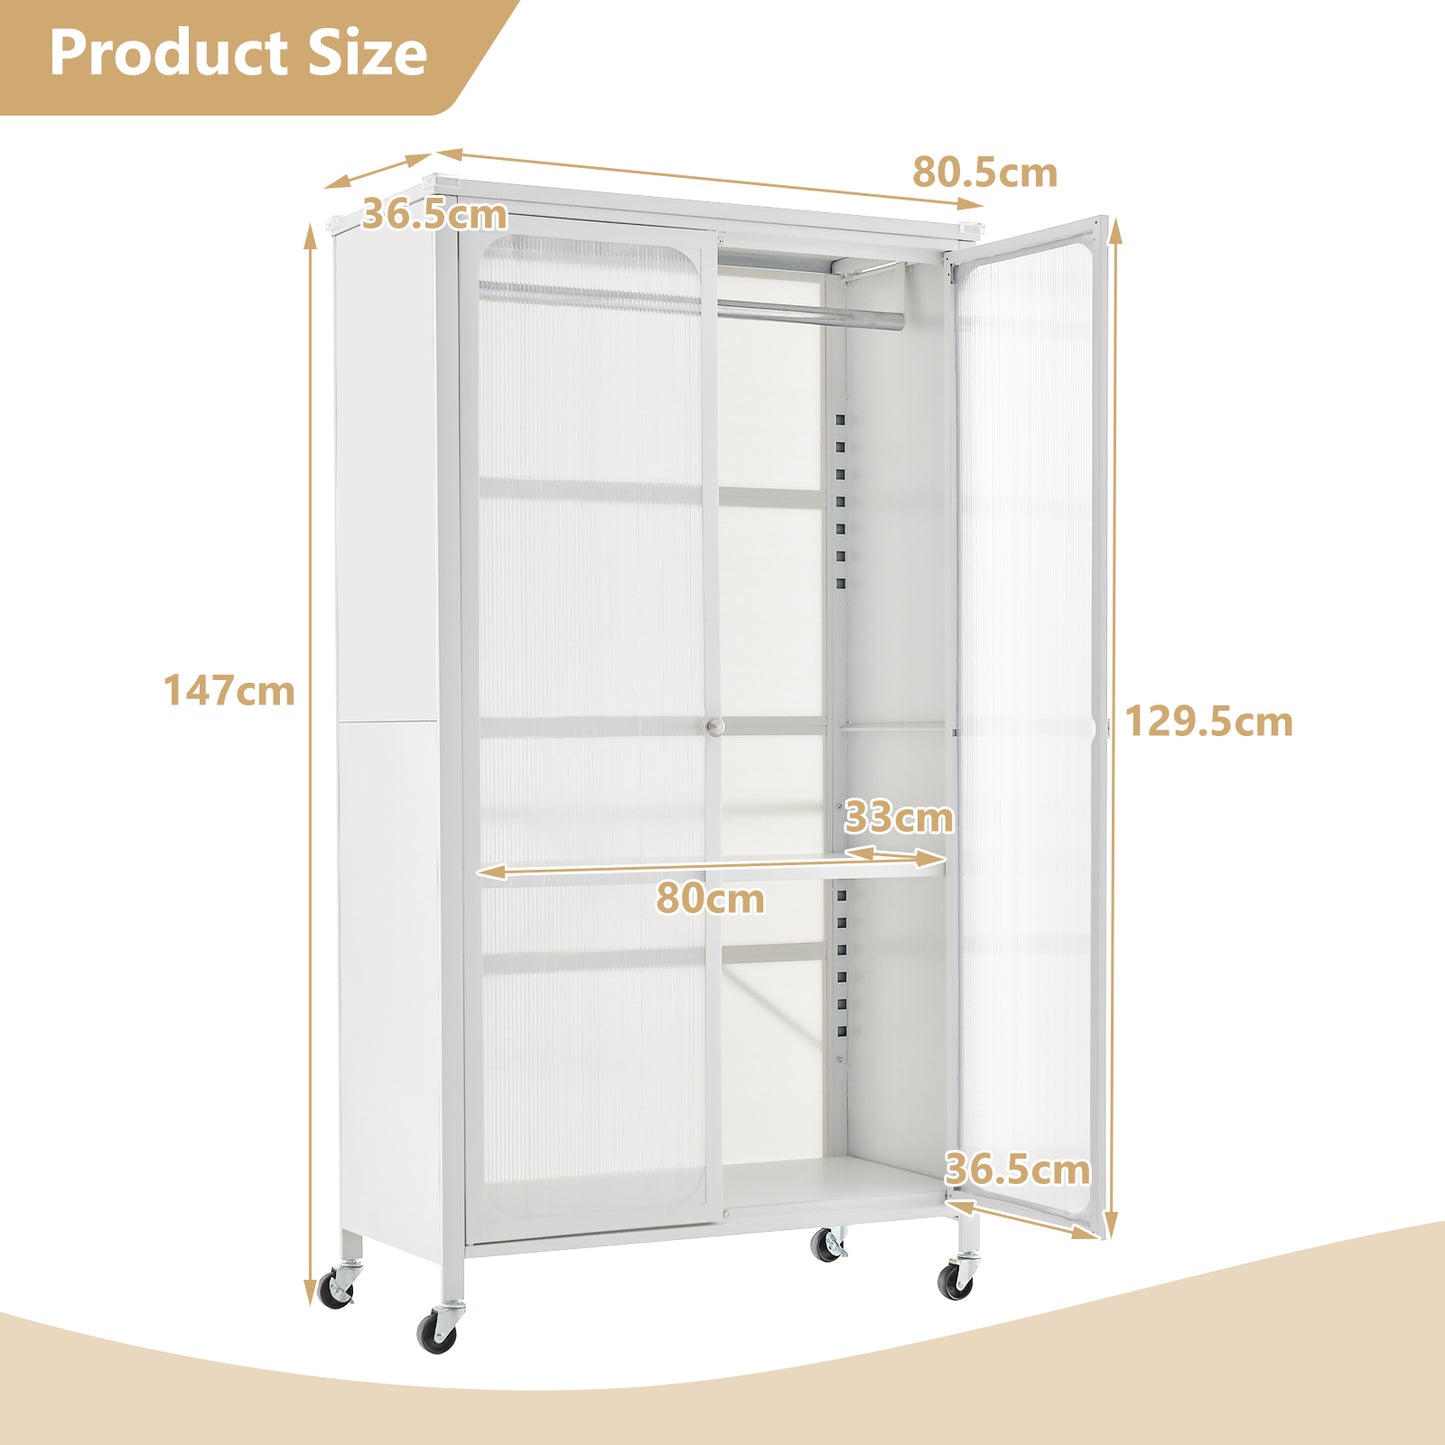 Clothes Rail, Wardrobe on Wheels, Mobile Metal Wardrobe Armoire Closet with Hanging Rod and Adjustable Shelf, White, Costway, 3